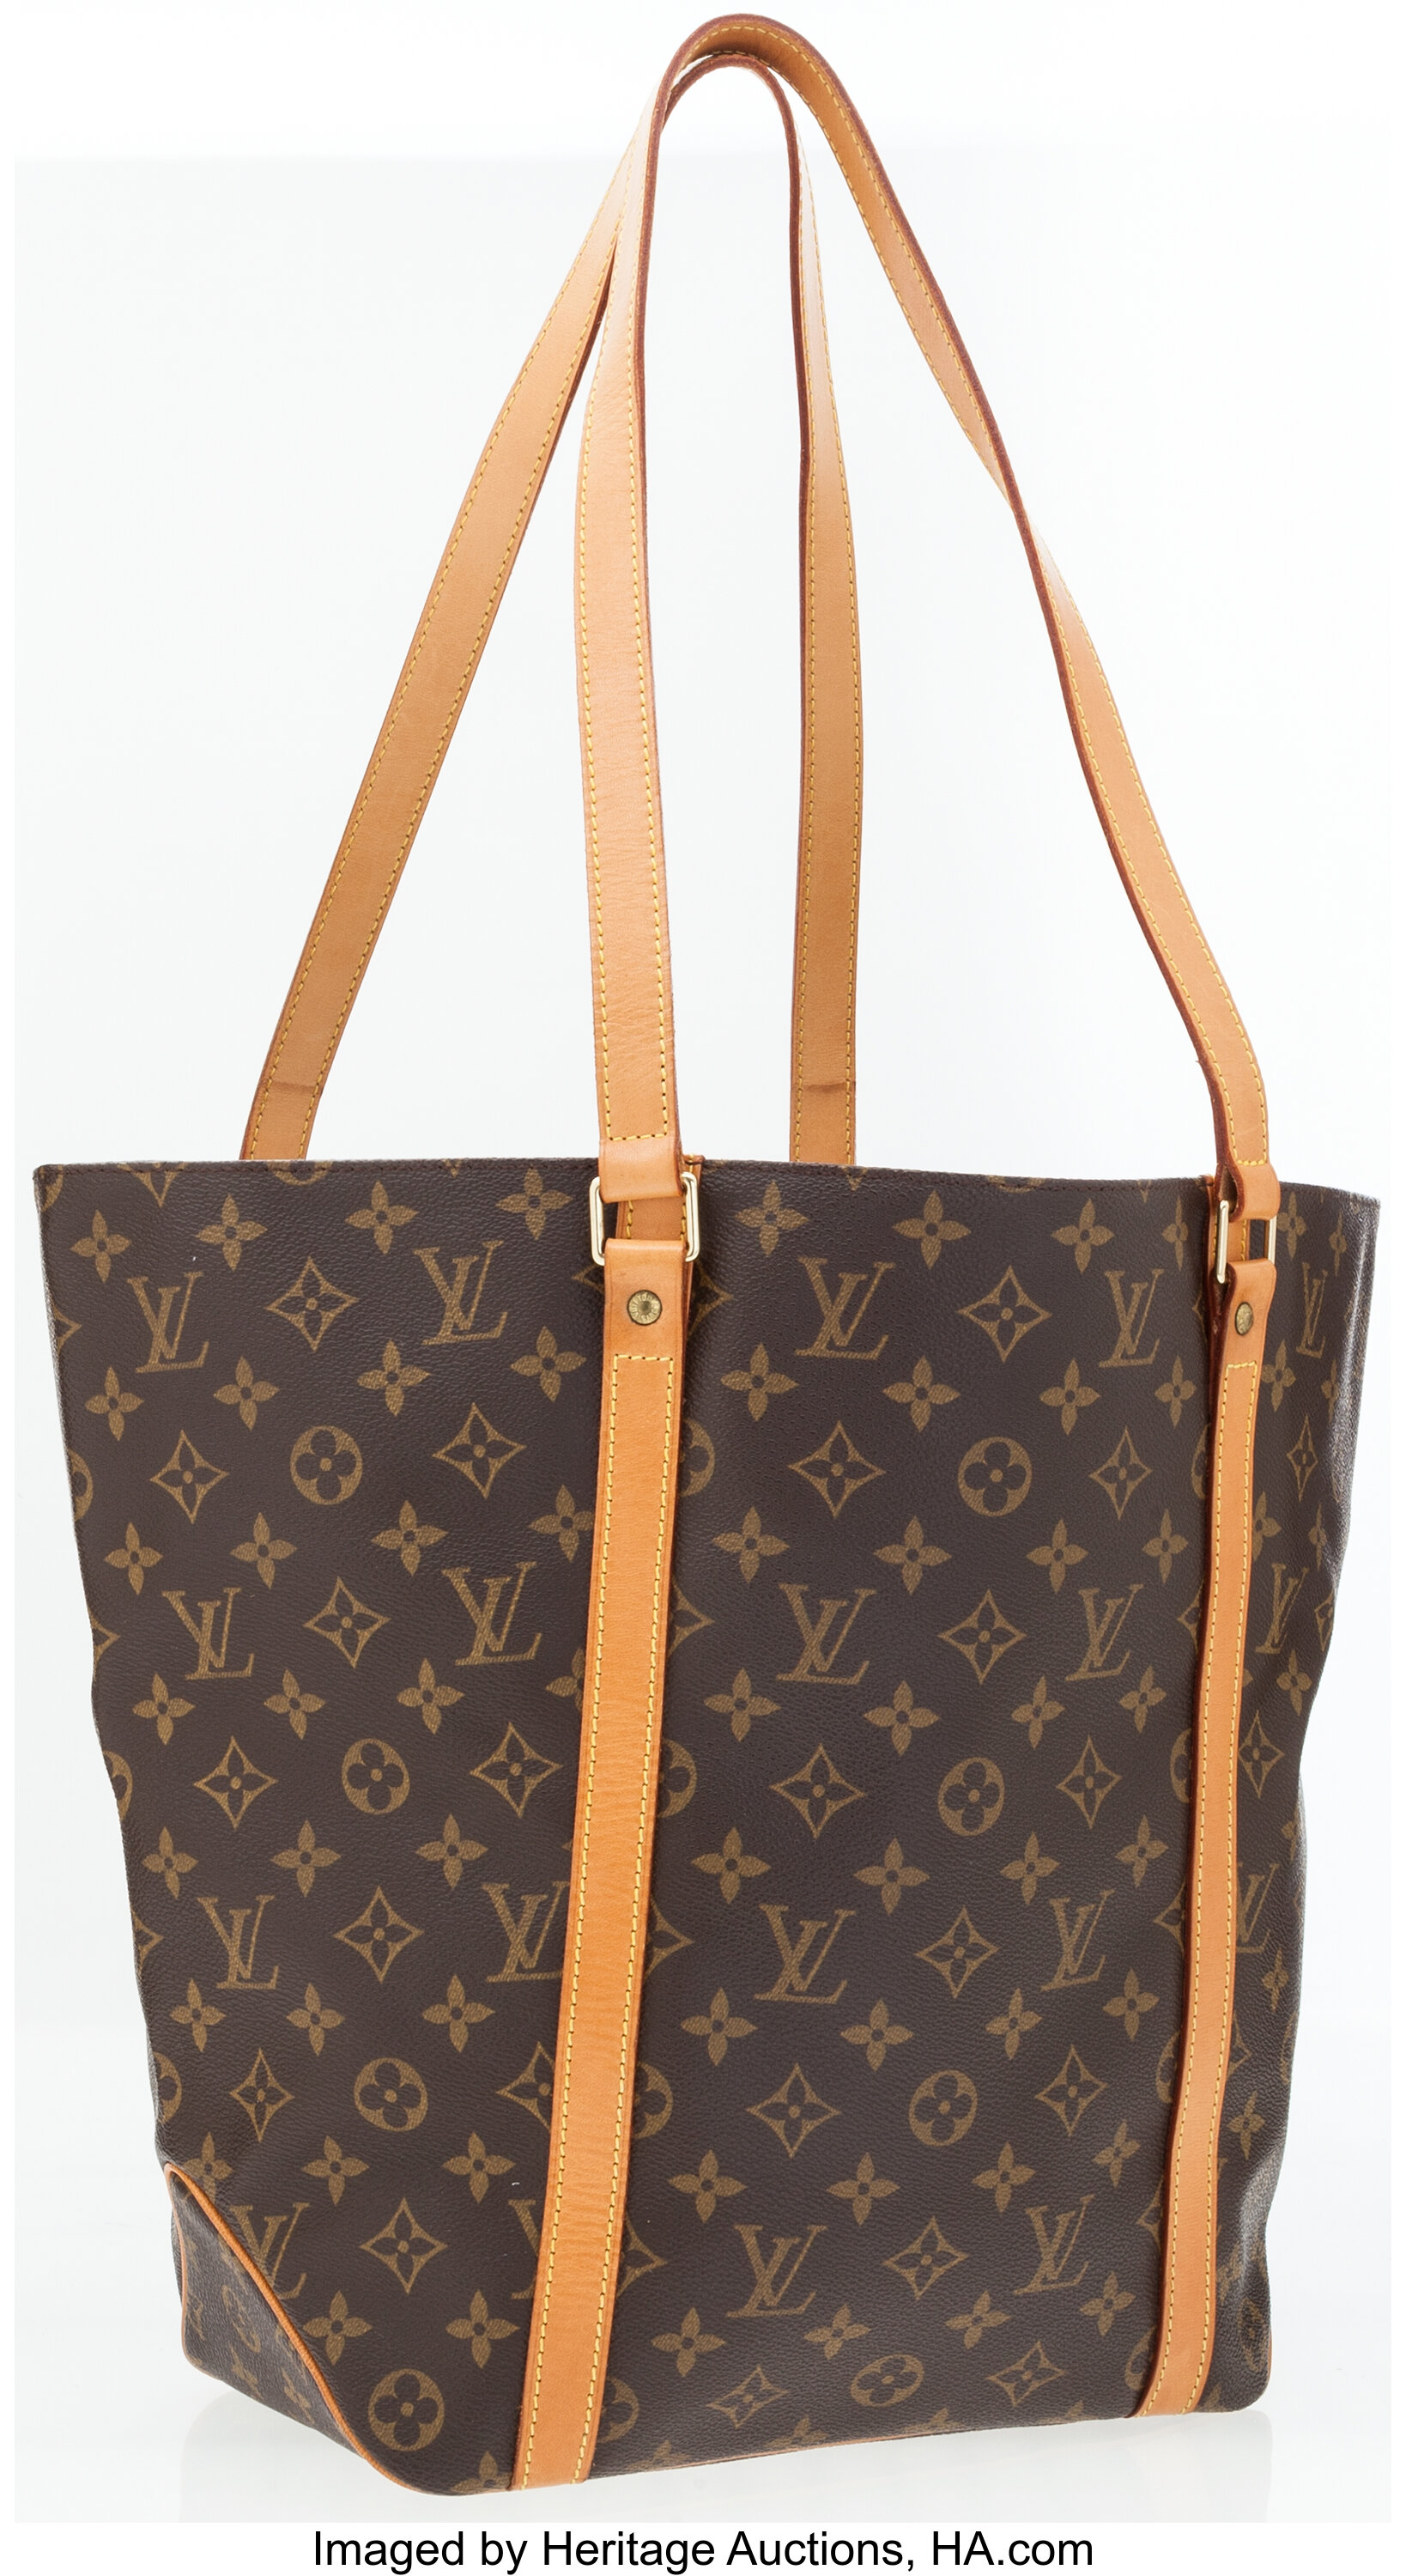 Sold at Auction: A Louis Vuitton leather and monogram canvas Sac